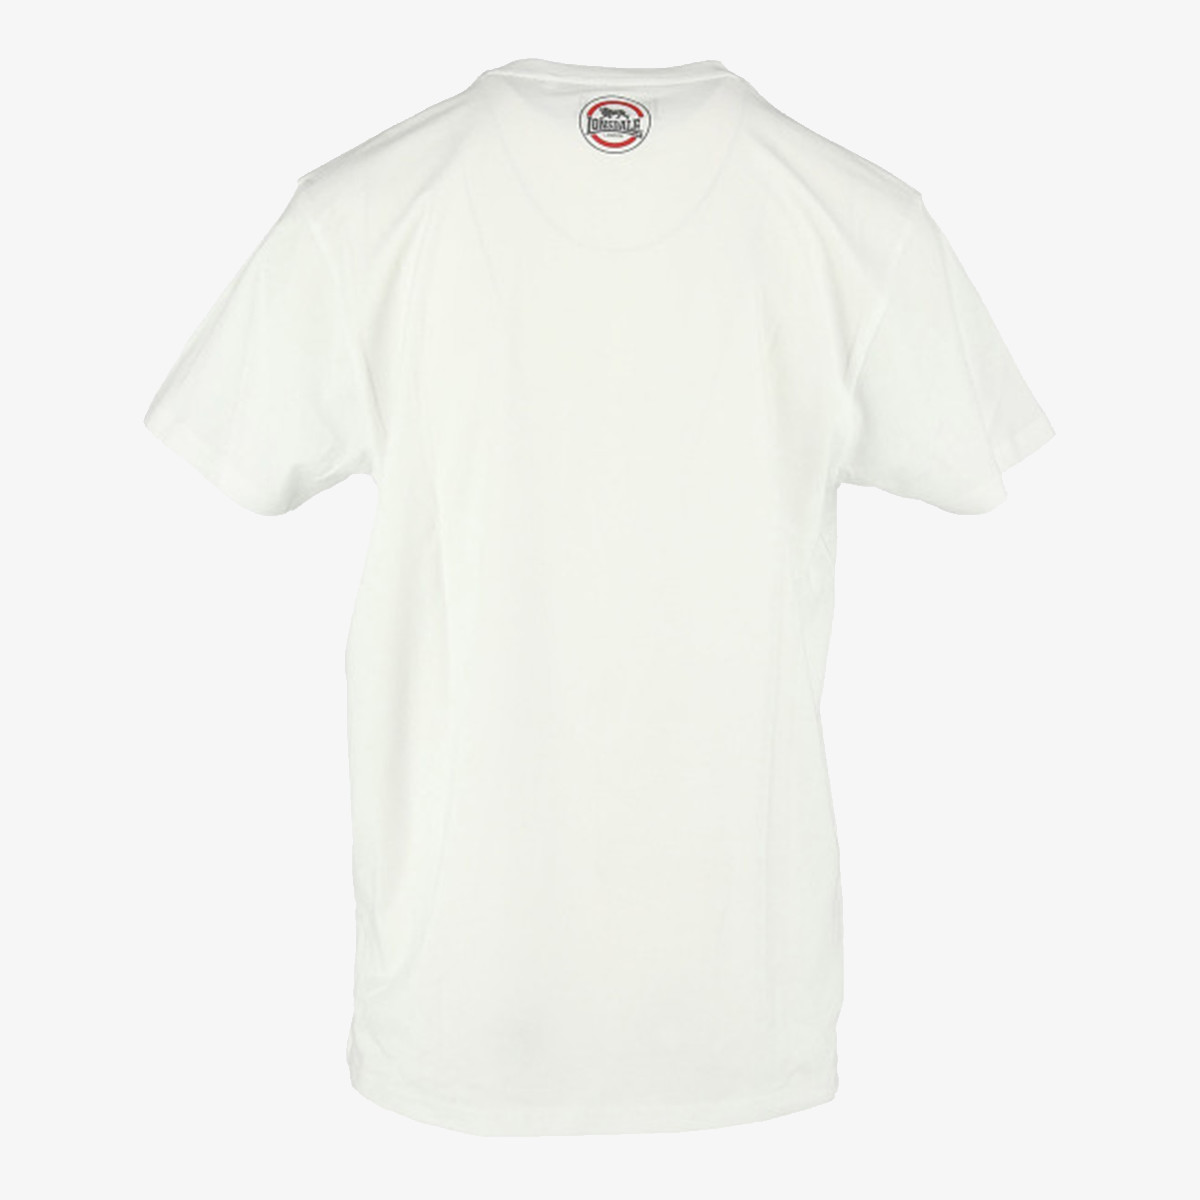 Lonsdale Lonsdale Mens Tee 